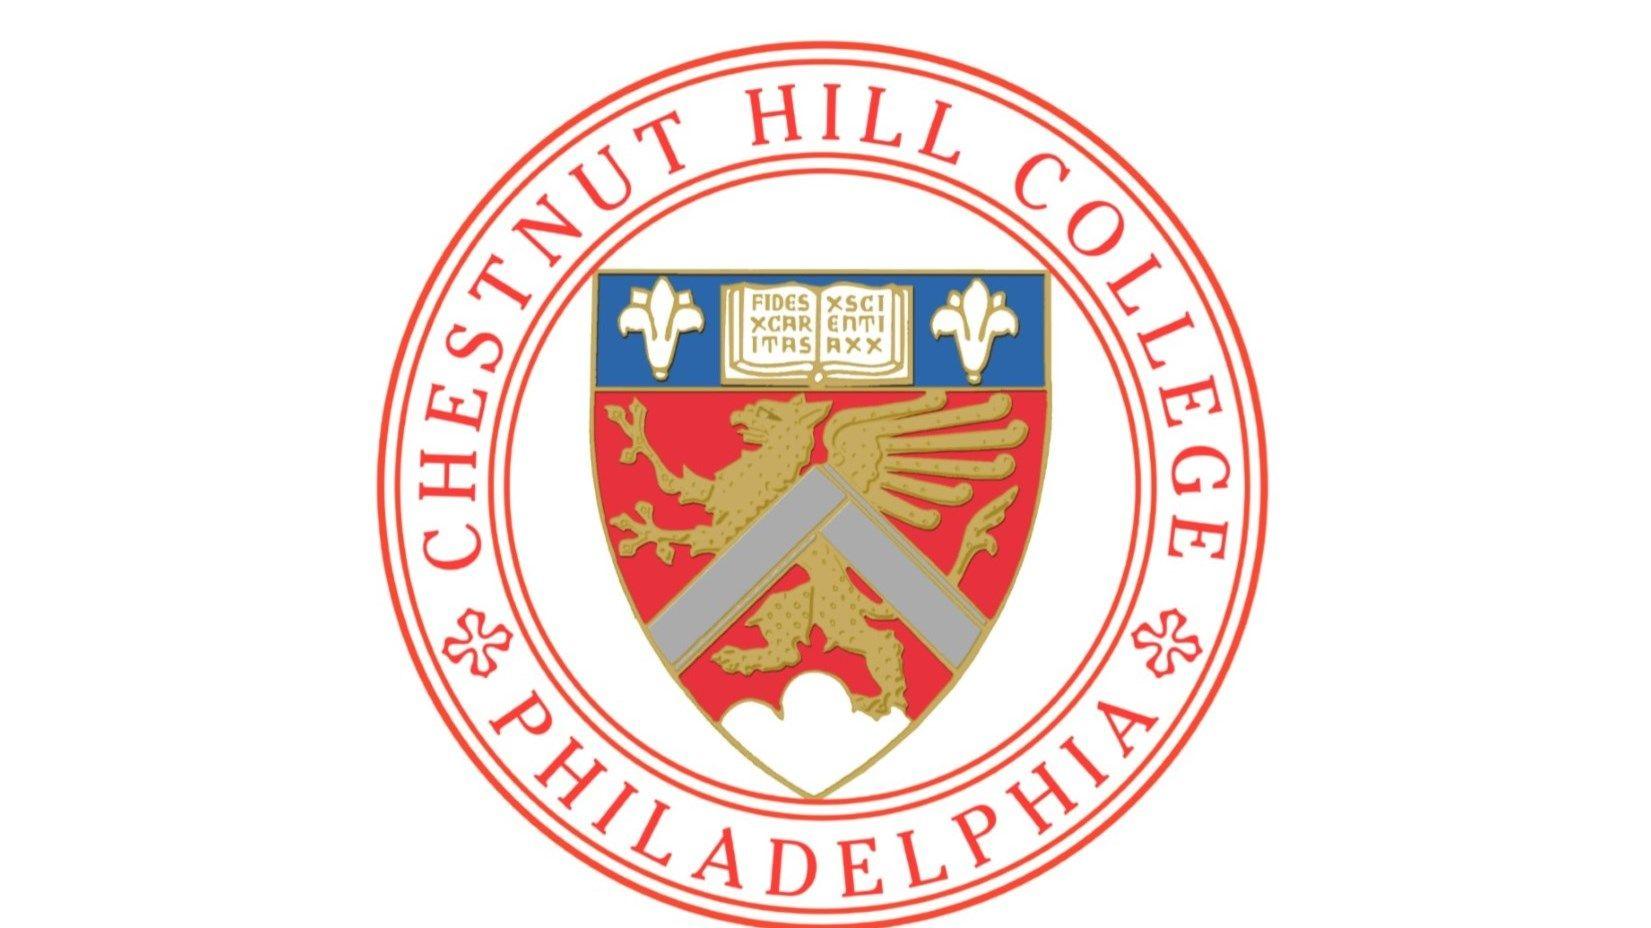 Hill College Logo - Chestnut Hill College Athletics Announces Fall 2017 Academic Honor ...